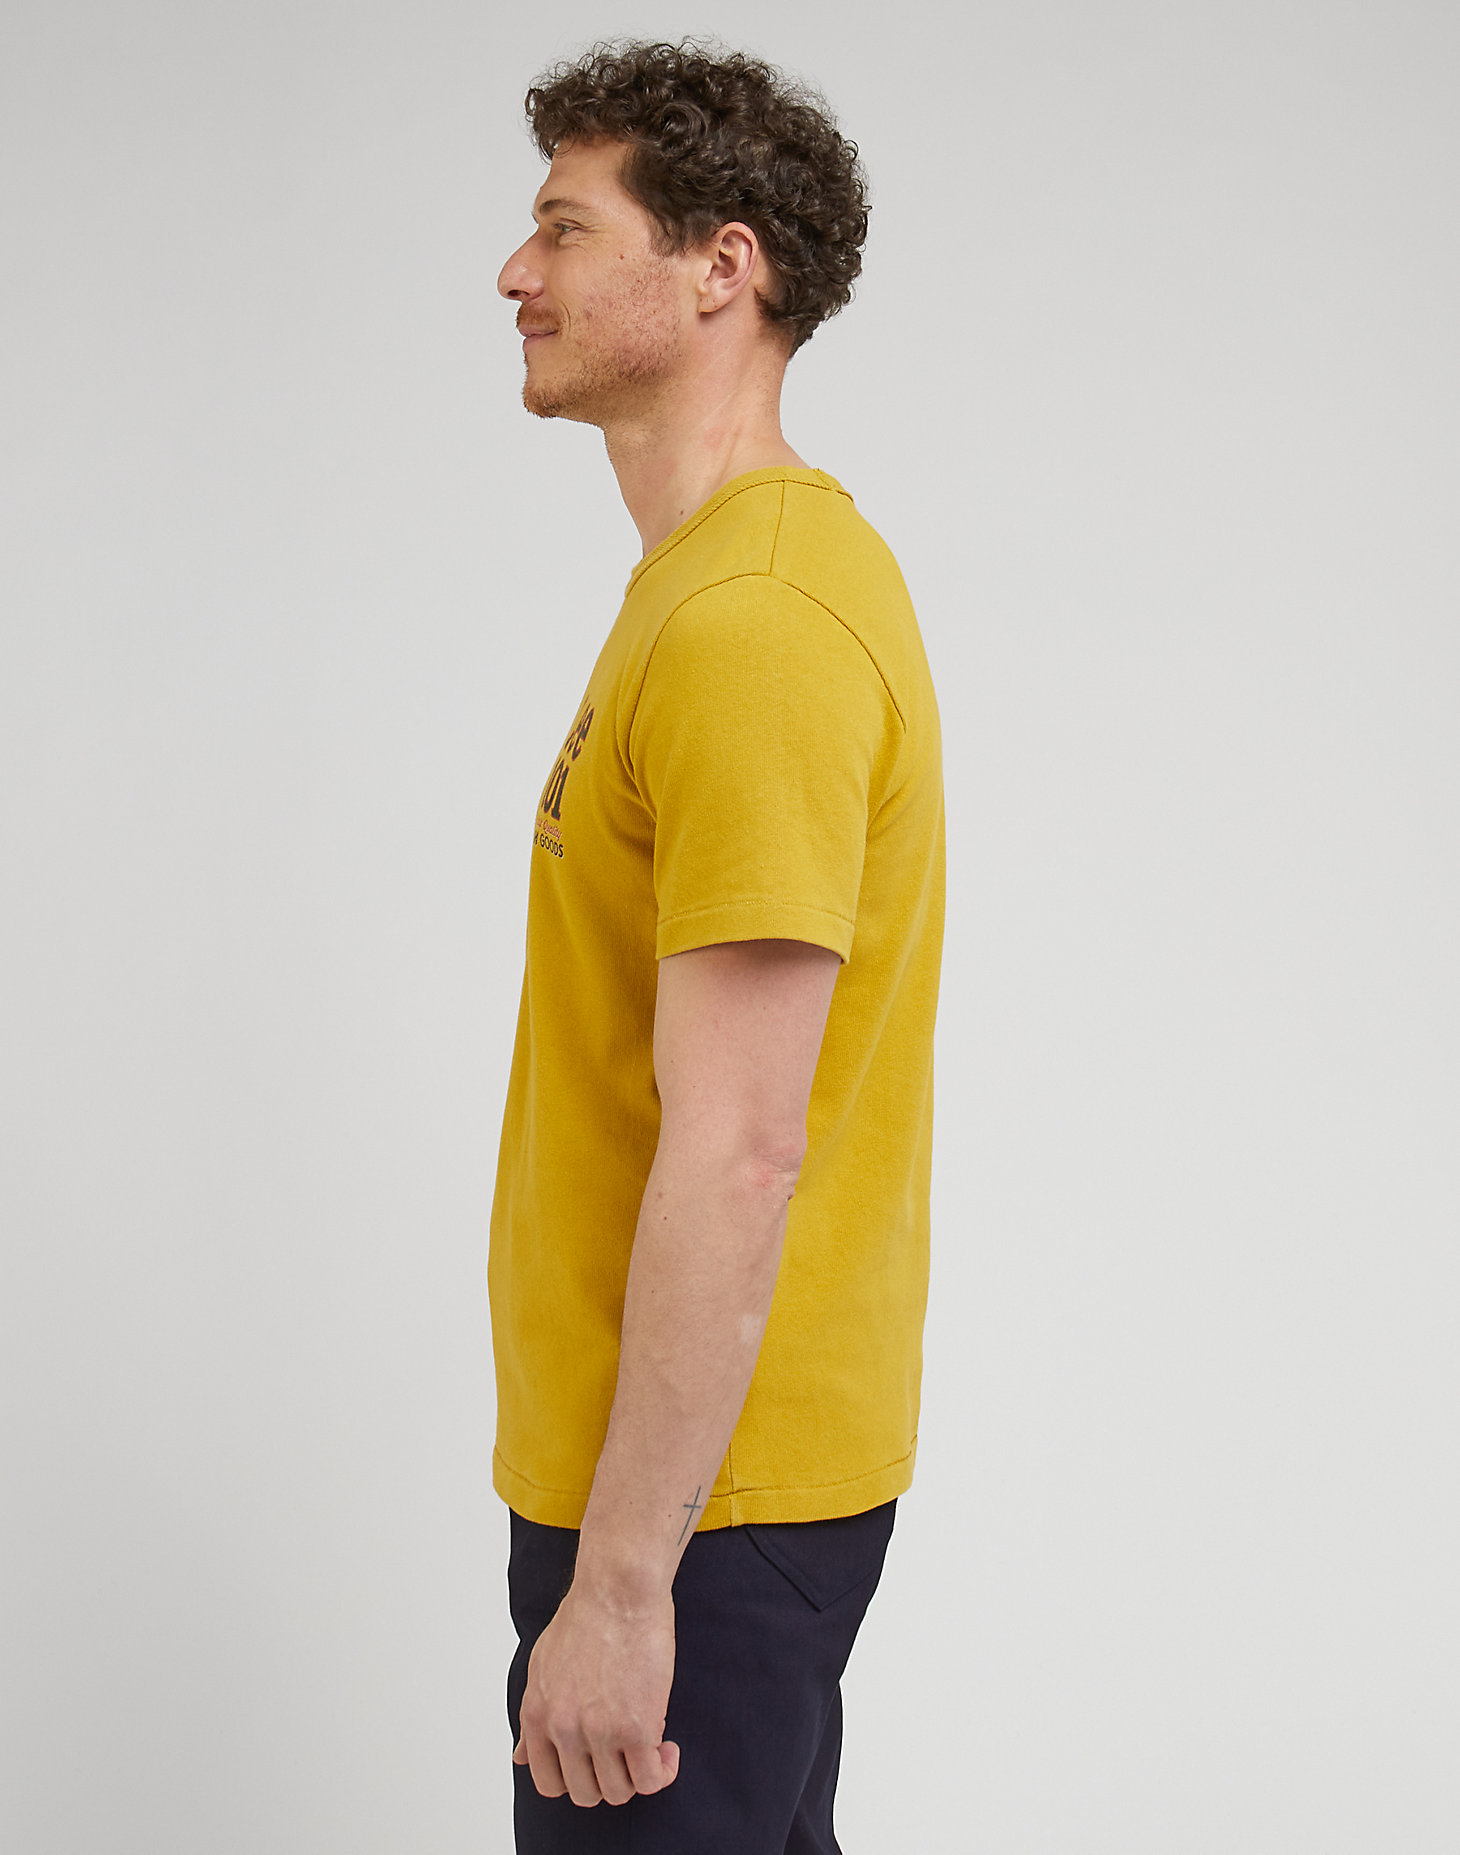 101 Core Tee in Maize alternative view 5